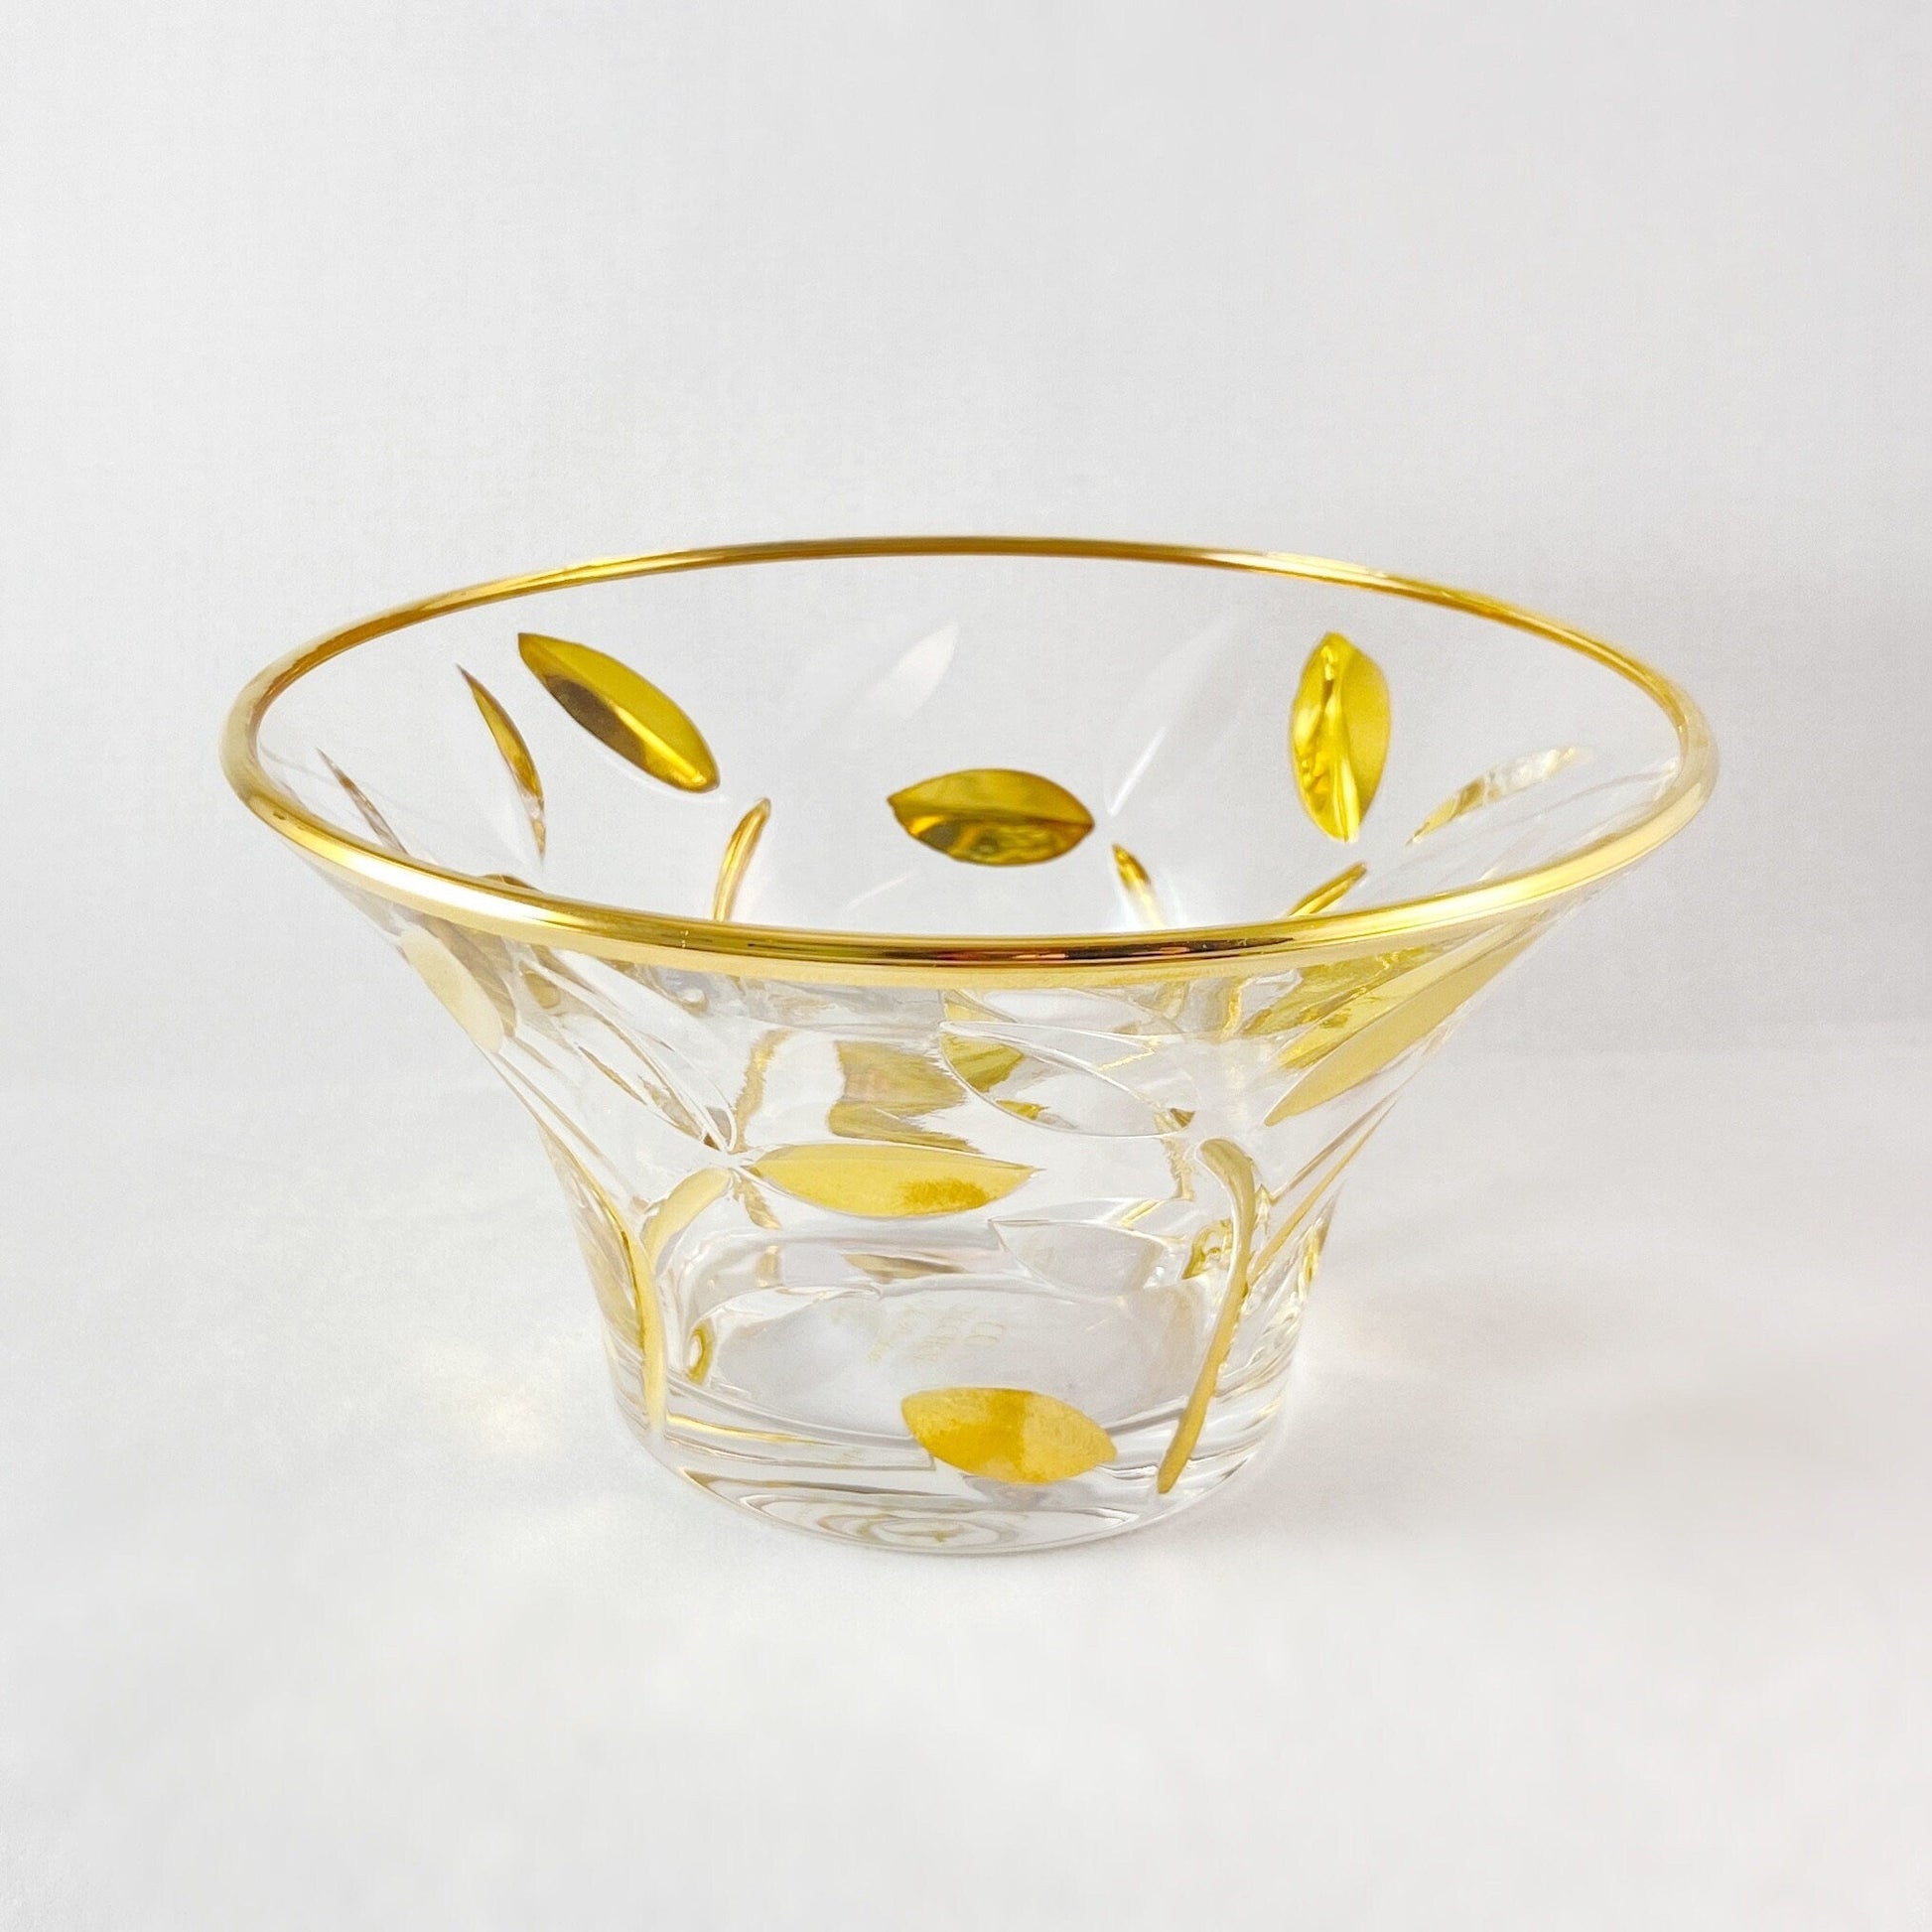 Venetian Glass 24 Kt Gold Tree of Life Dish - Handmade in Italy, Colorful Murano Glass Bowl